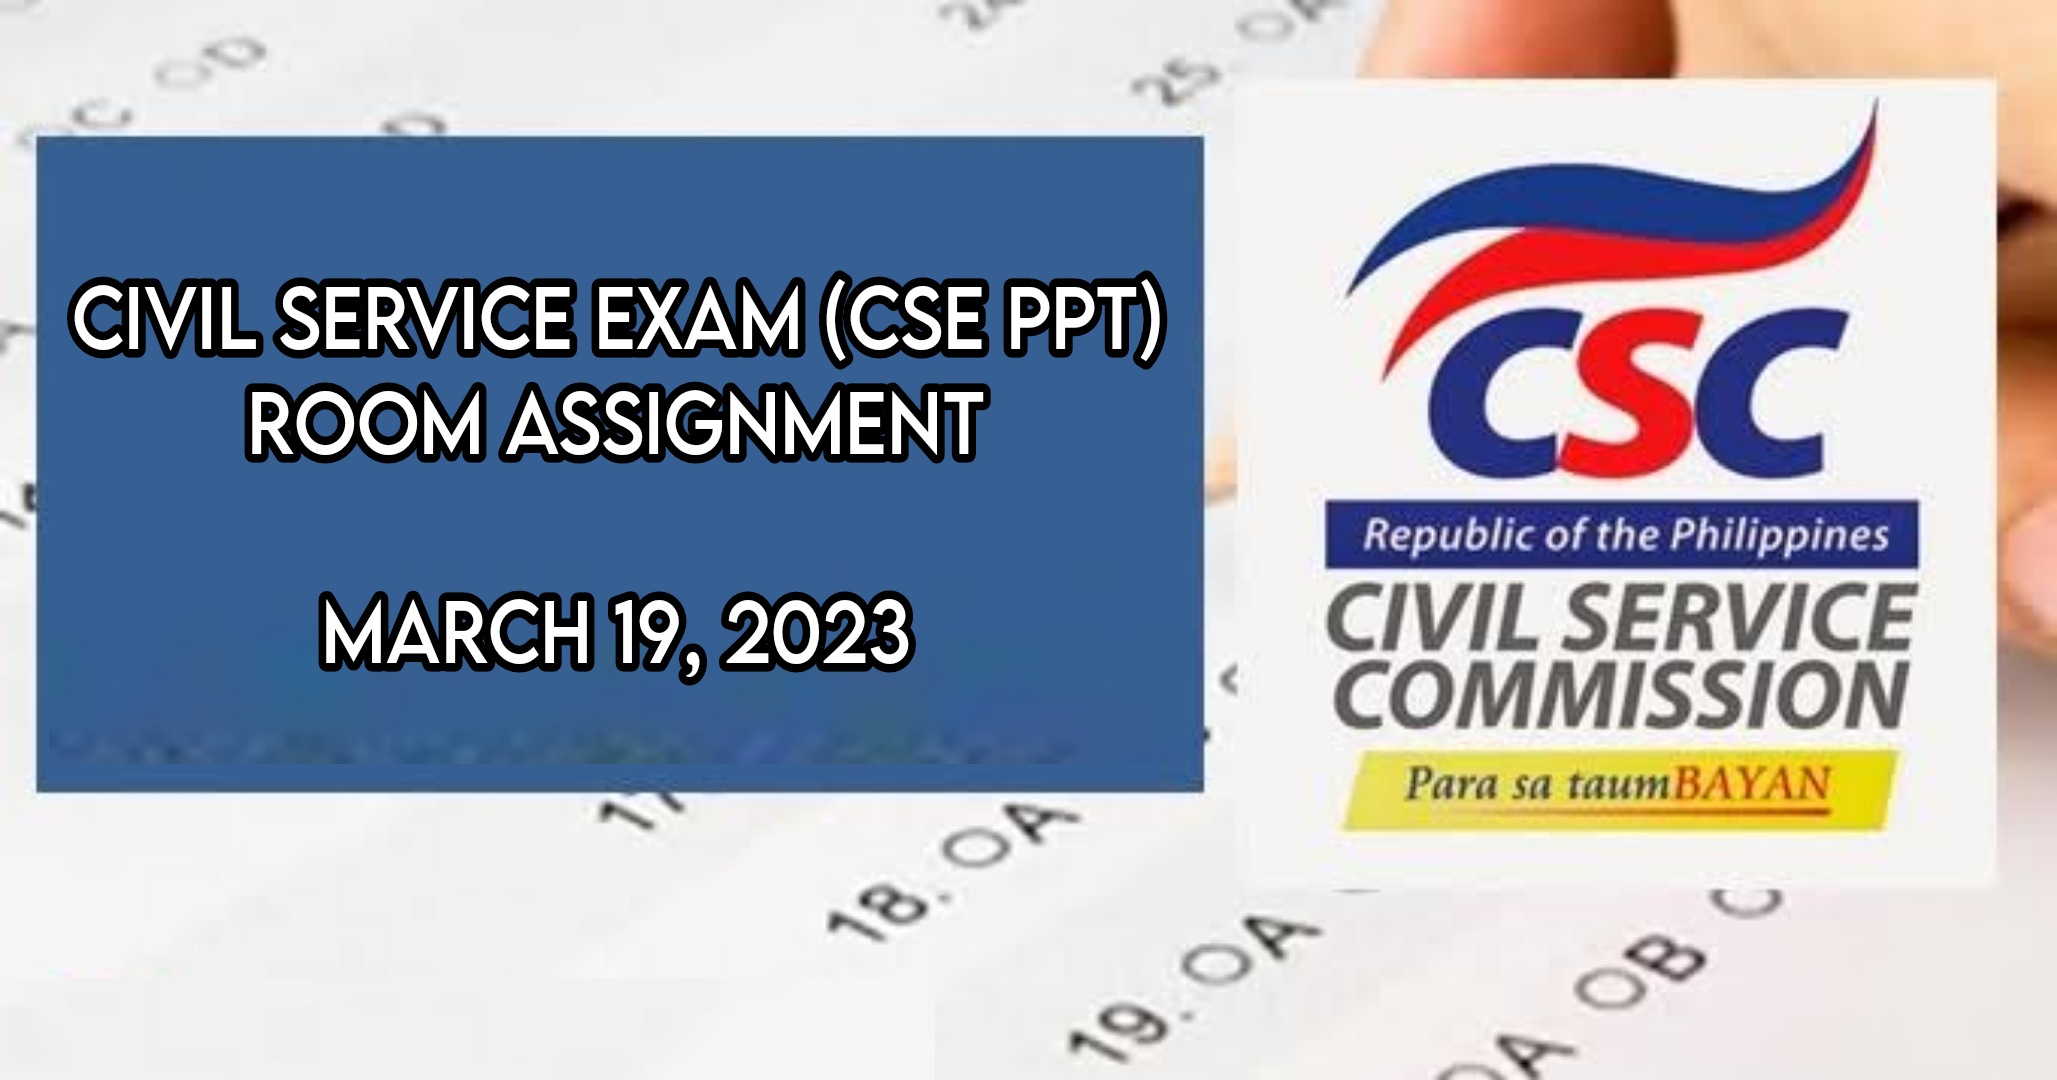 csc room assignment 2023 ncr